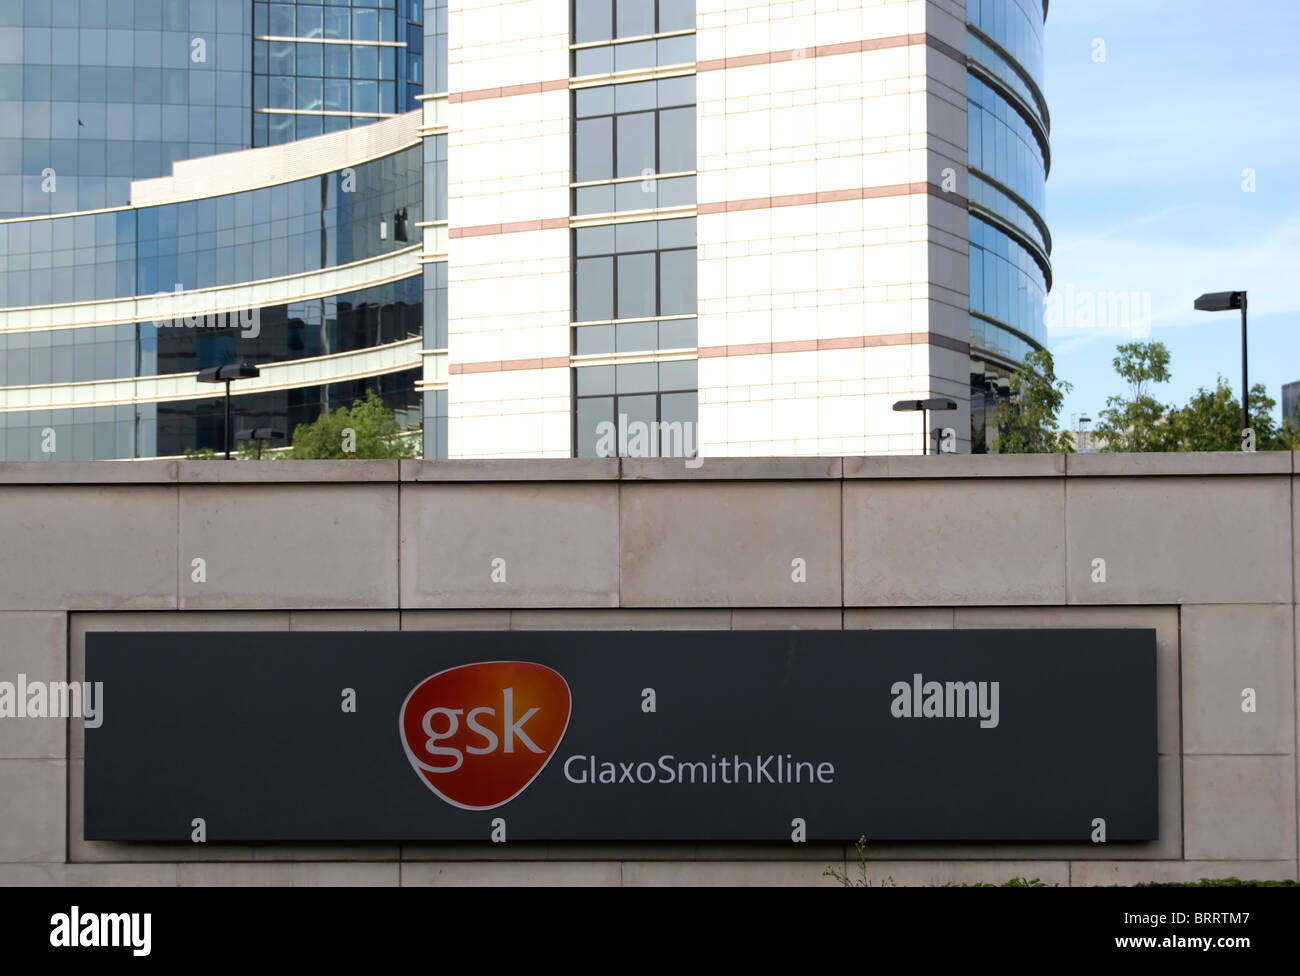 world headquarters of pharmaceutical company gsk, or glaxo smith kline, with name and logo in foreground Stock Photo